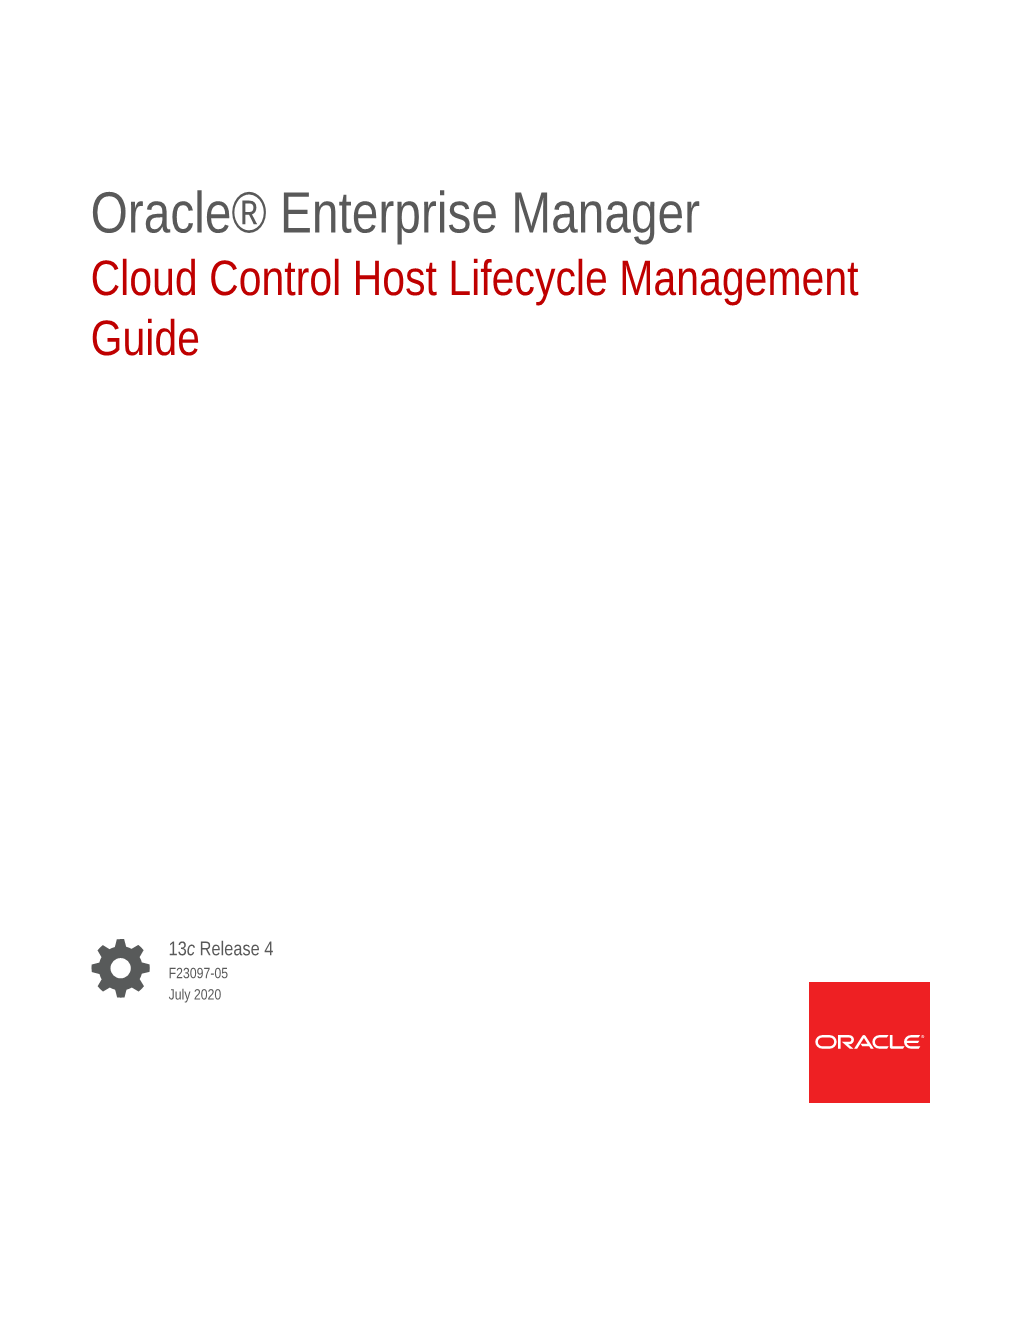 Cloud Control Host Lifecycle Management Guide